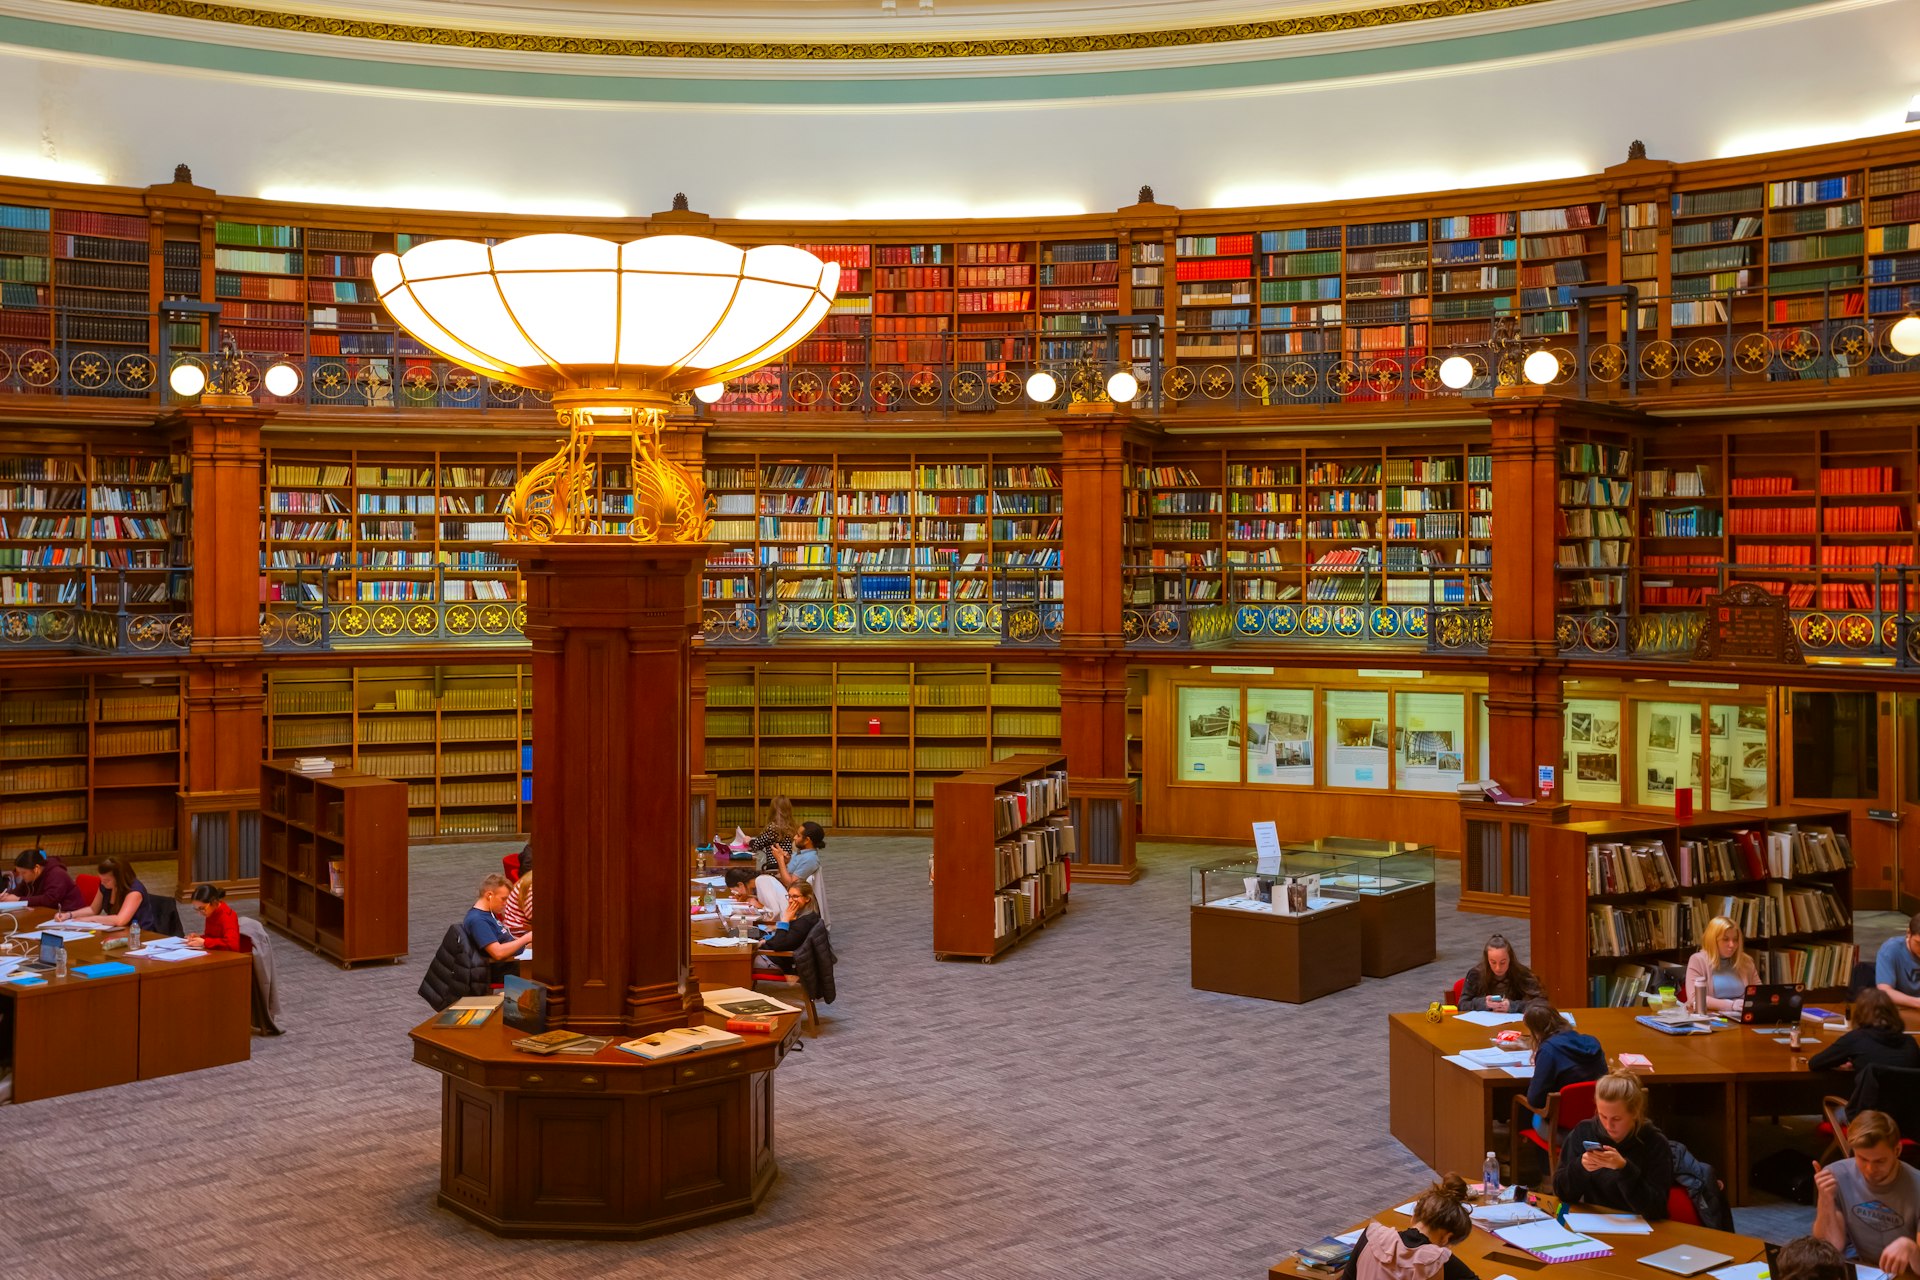 The Picton Reading Room at Liverpool Central Library was founded in 1875